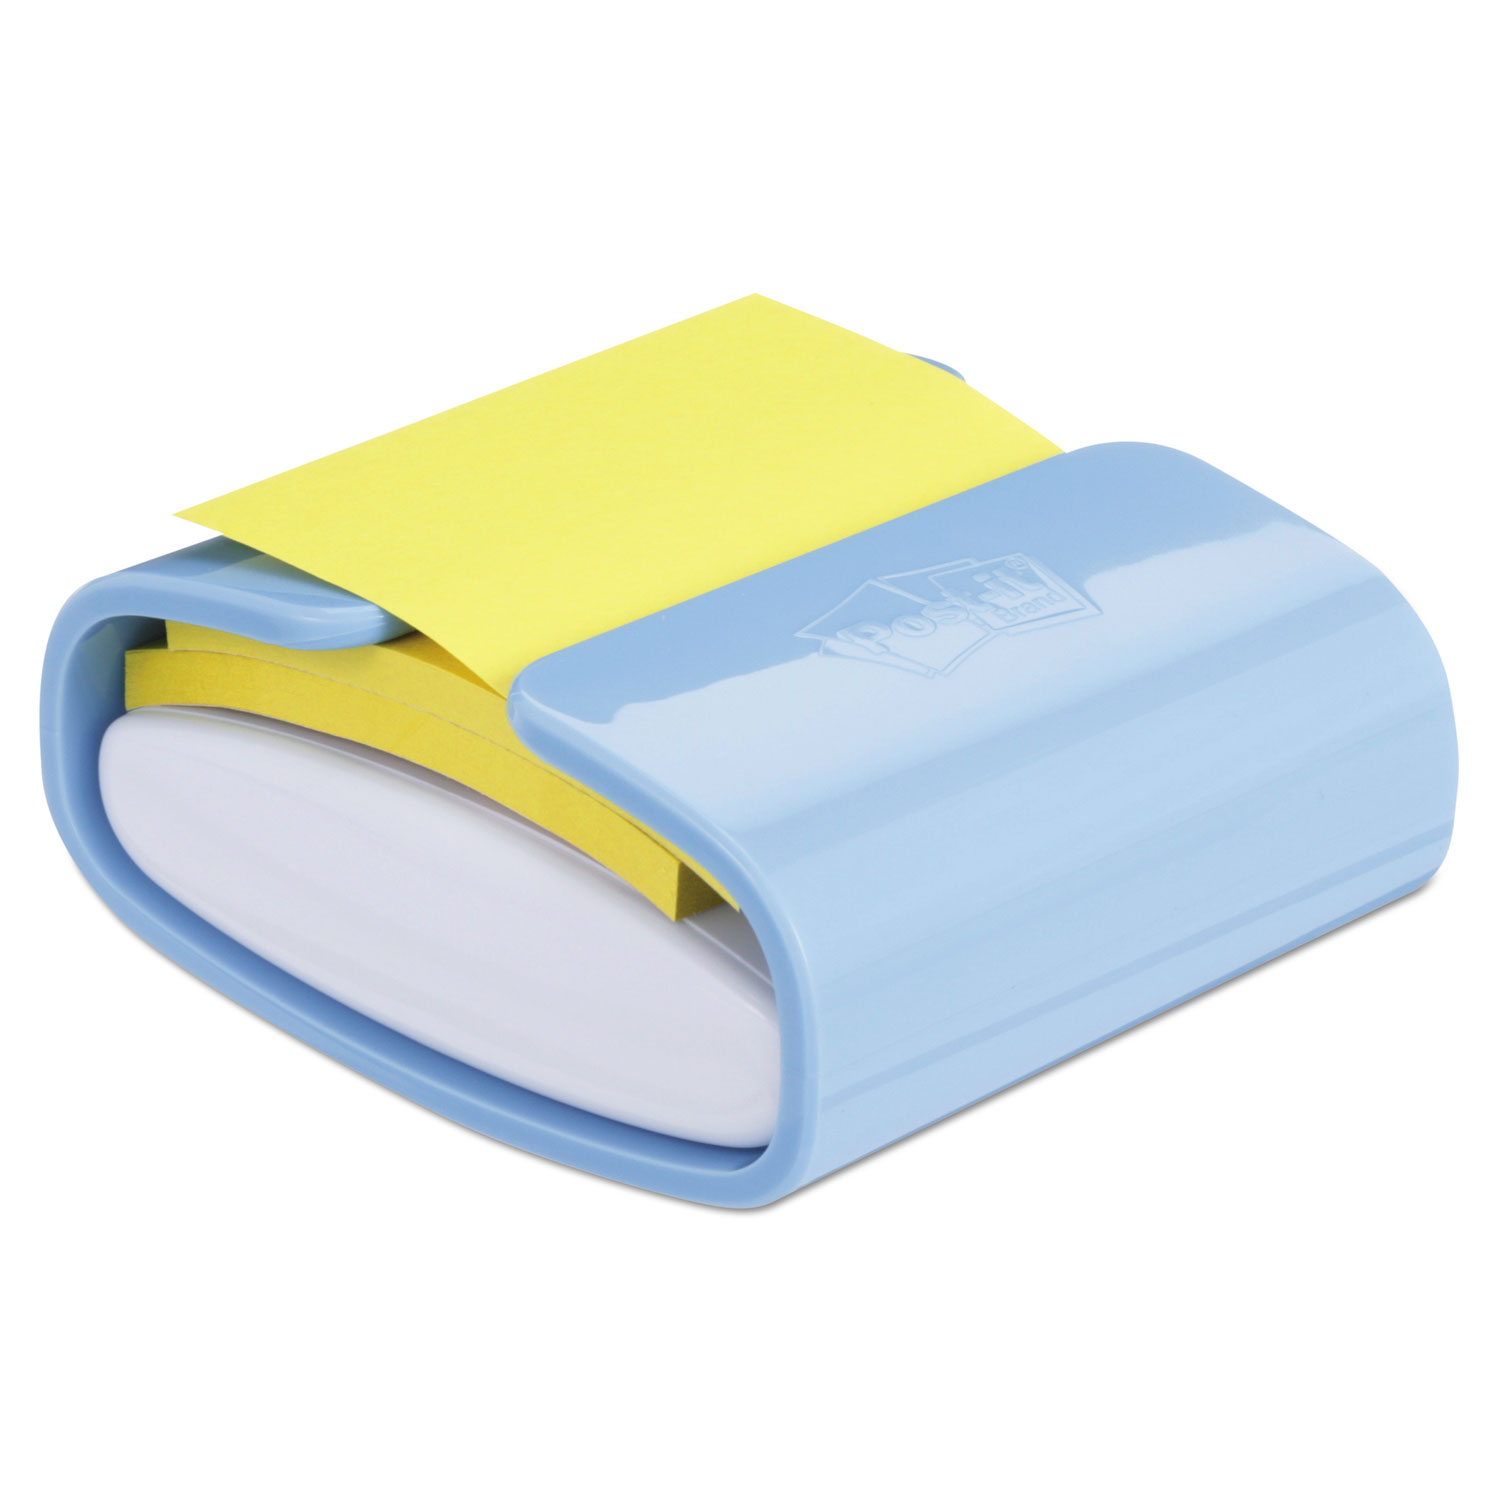  Post-it Pop-up Notes Super Sticky WD-330-COL-PW Wrap Dispenser, For 3 x 3 Pads, White/Periwinkle (MMMWD330COLPW) 